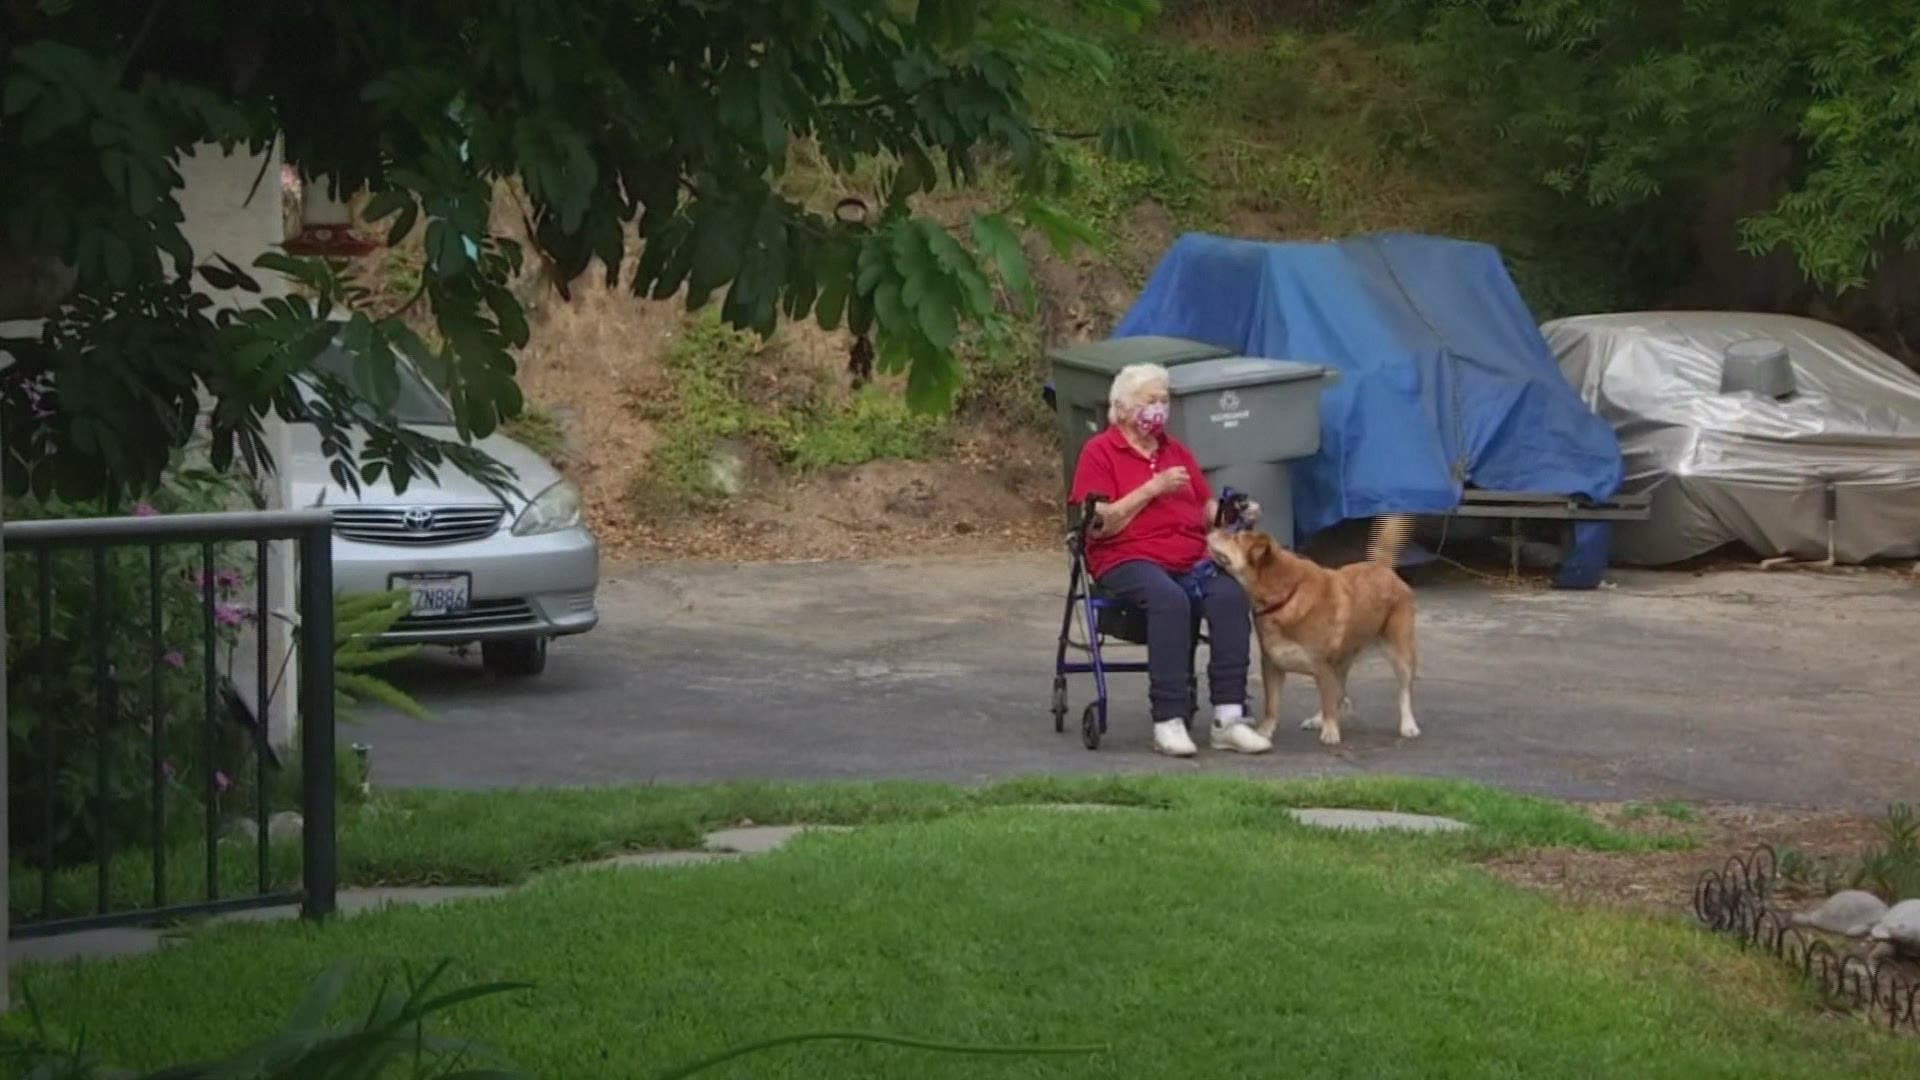 After his 88-year-old owner fell and couldn't get up, Sandy got the attention of a sanitation worker who had come to the home.